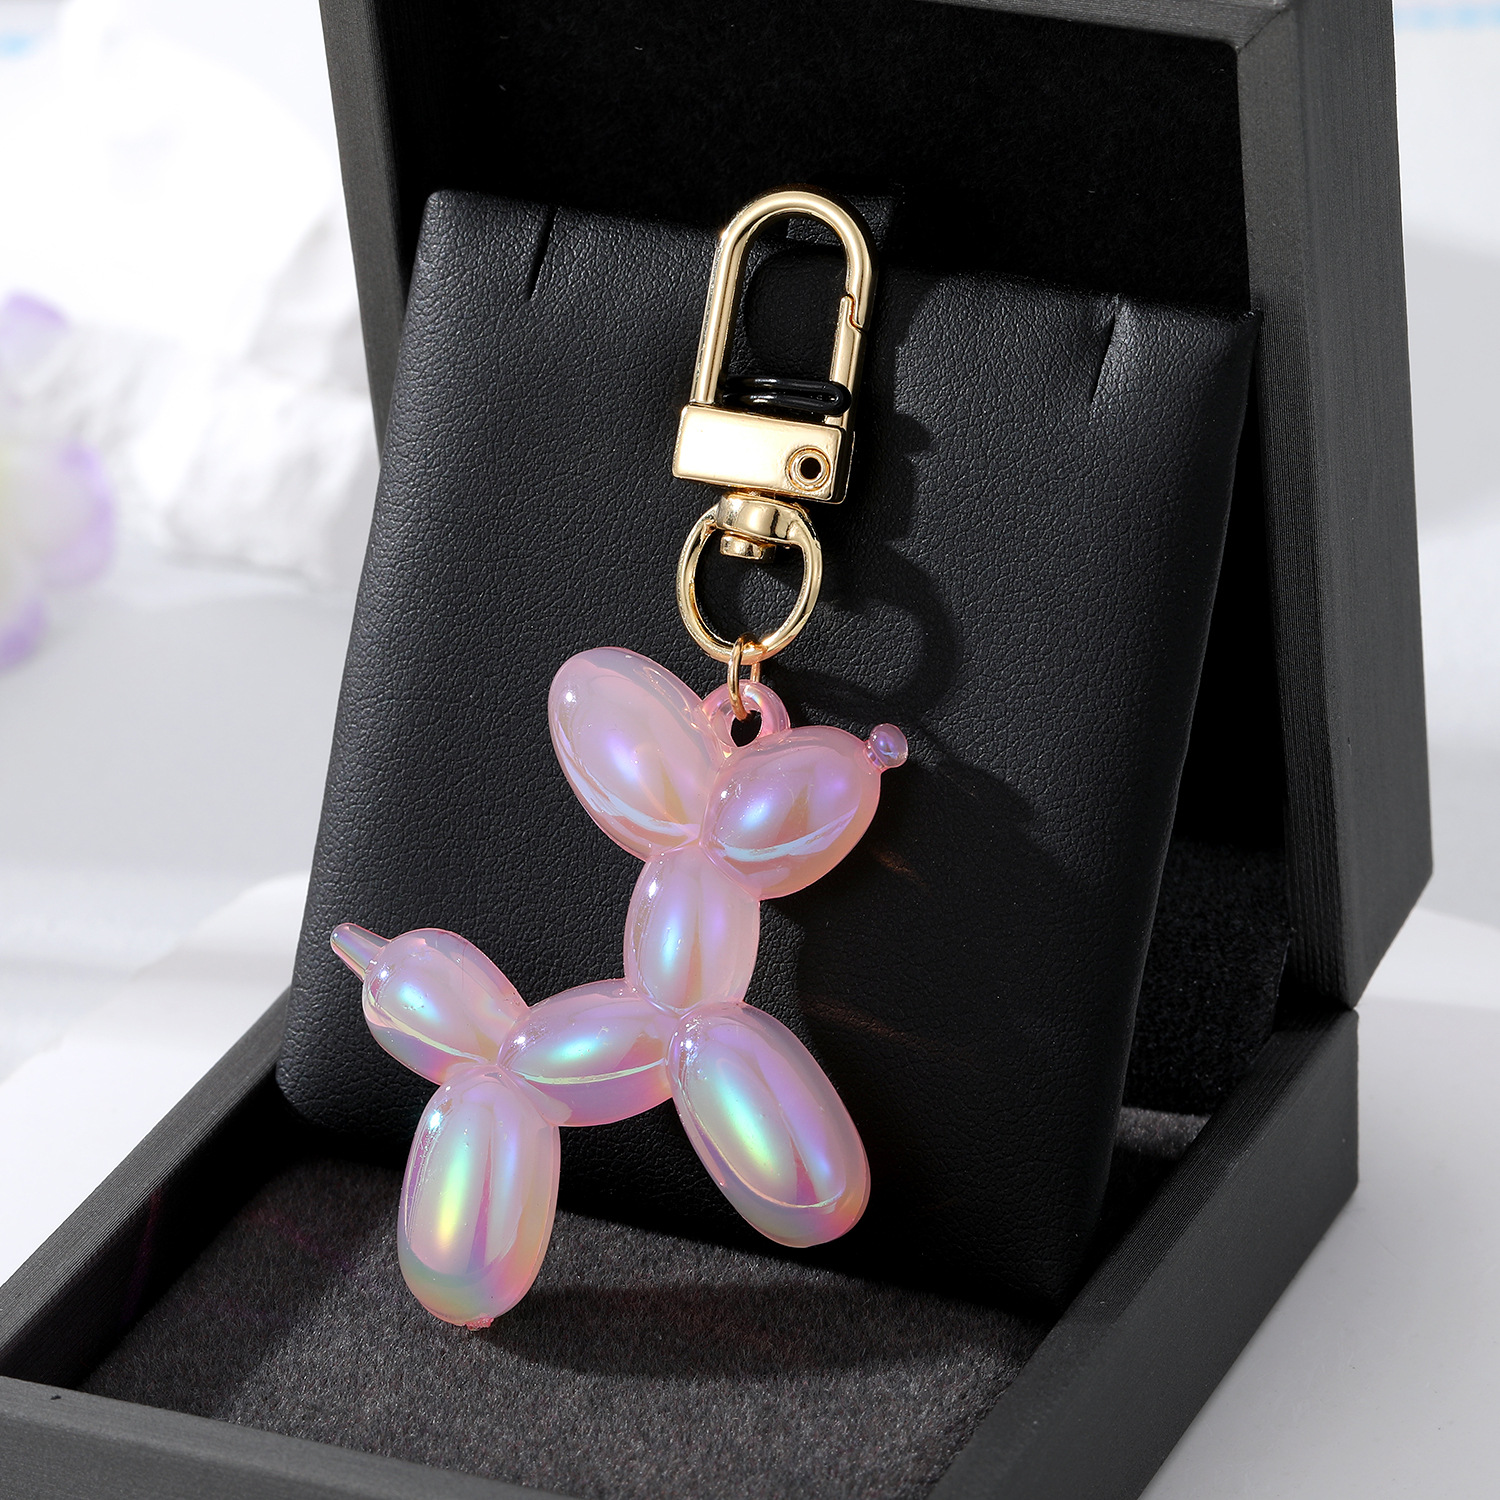 Bling Kawaii Cartoon Animal Couple Keychains Laser balloon dog Key Ring for Women Men New Colorful Cute Pet Bag Car Holder Airpods Box Jewelry